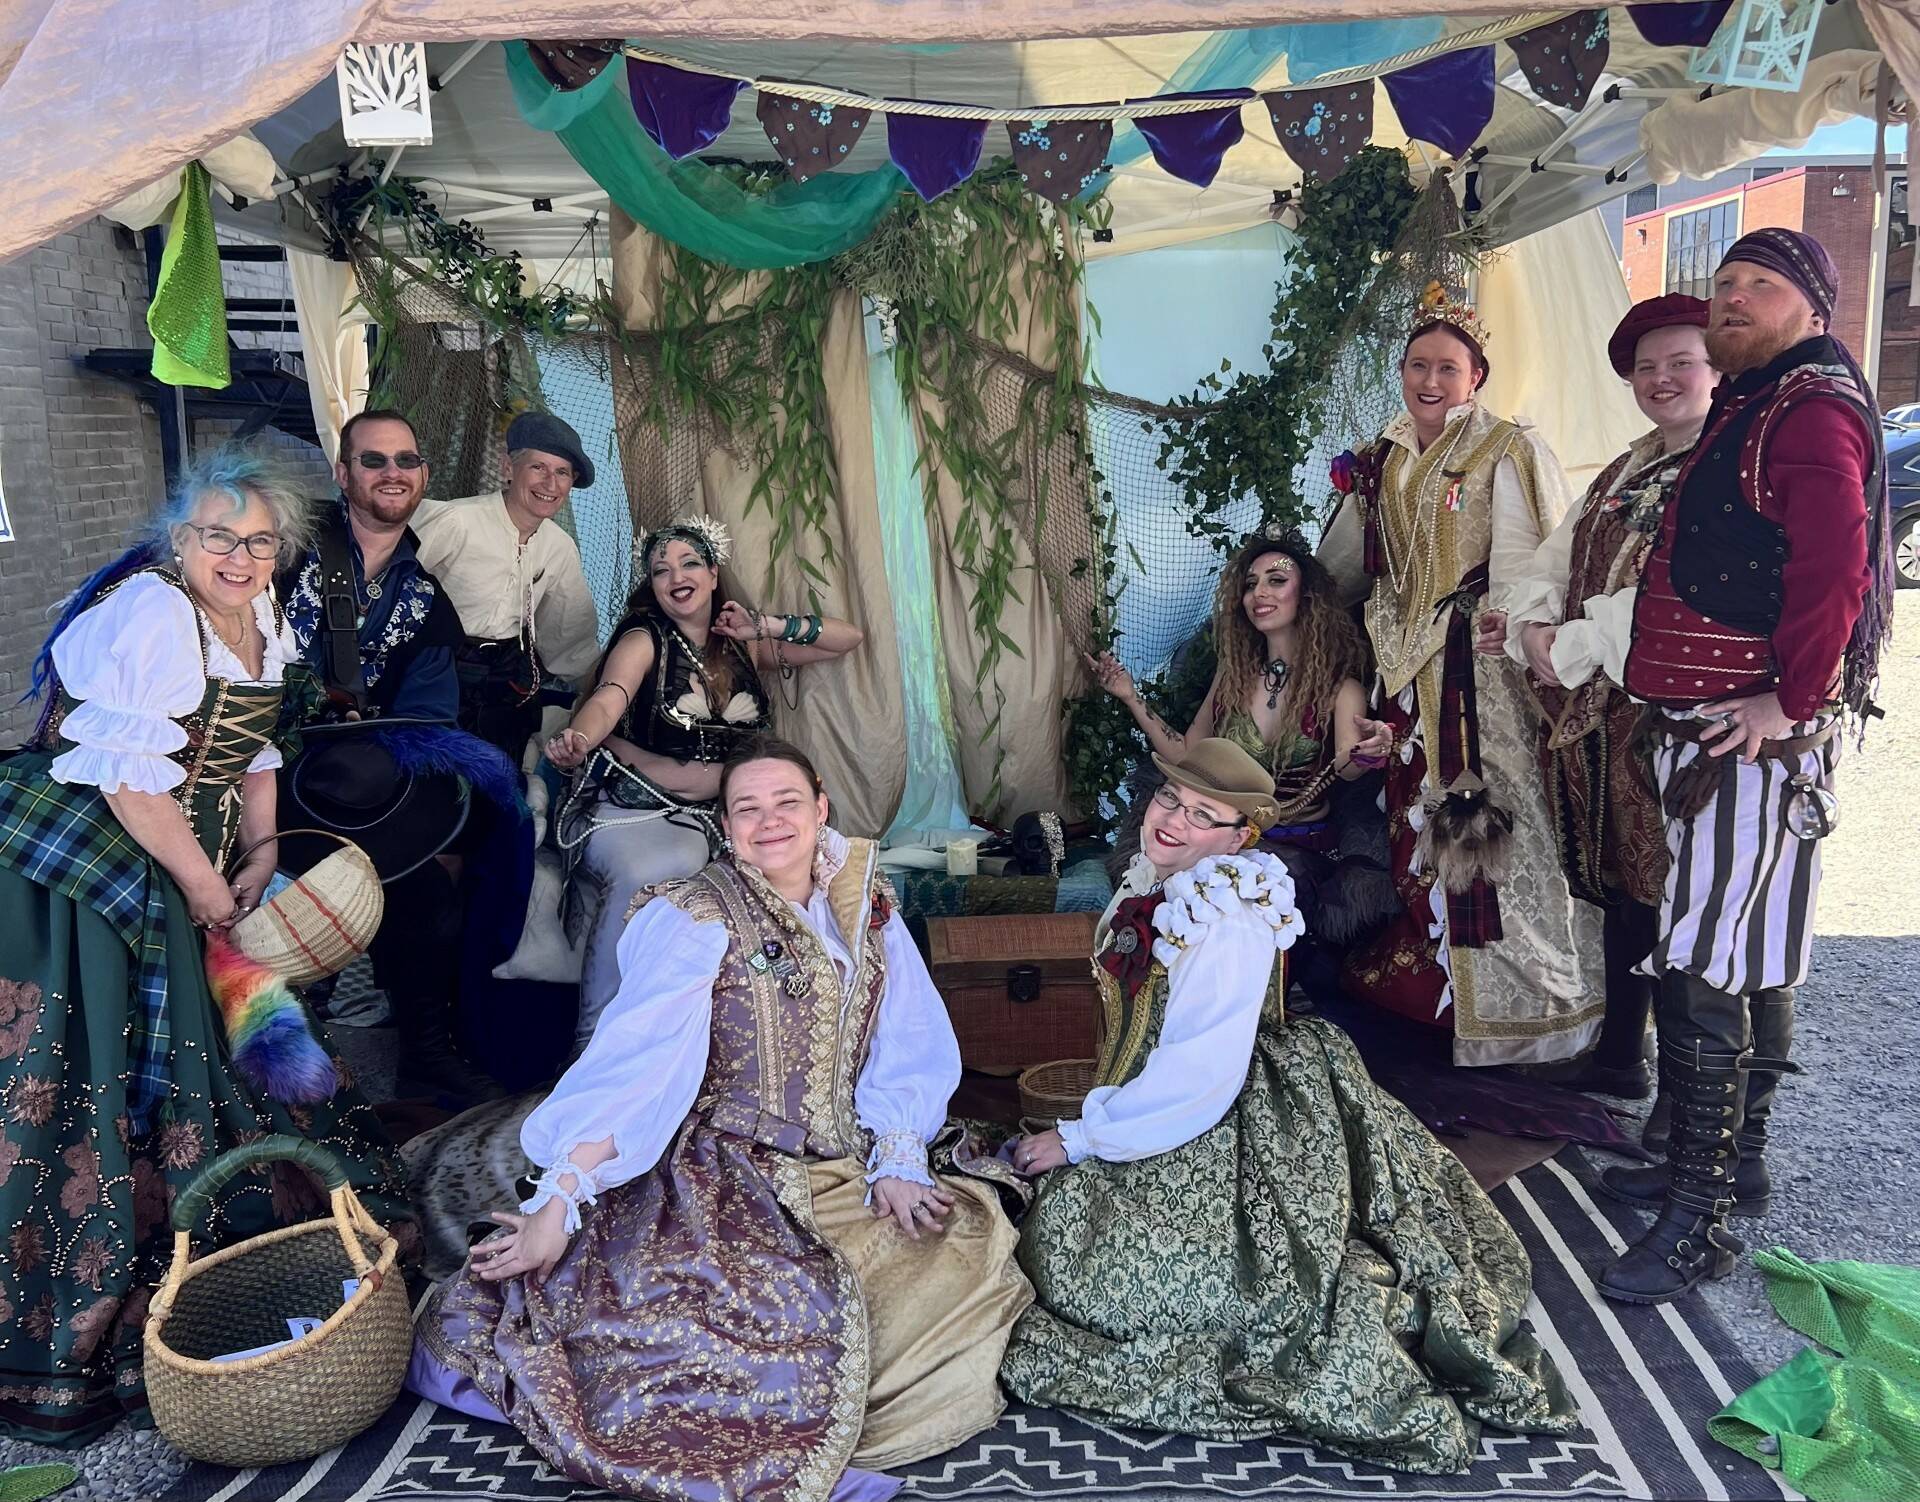 Photo by Bill Huls of the Gilded Thistle
Some of the crew involved with the Renaissance Faire.